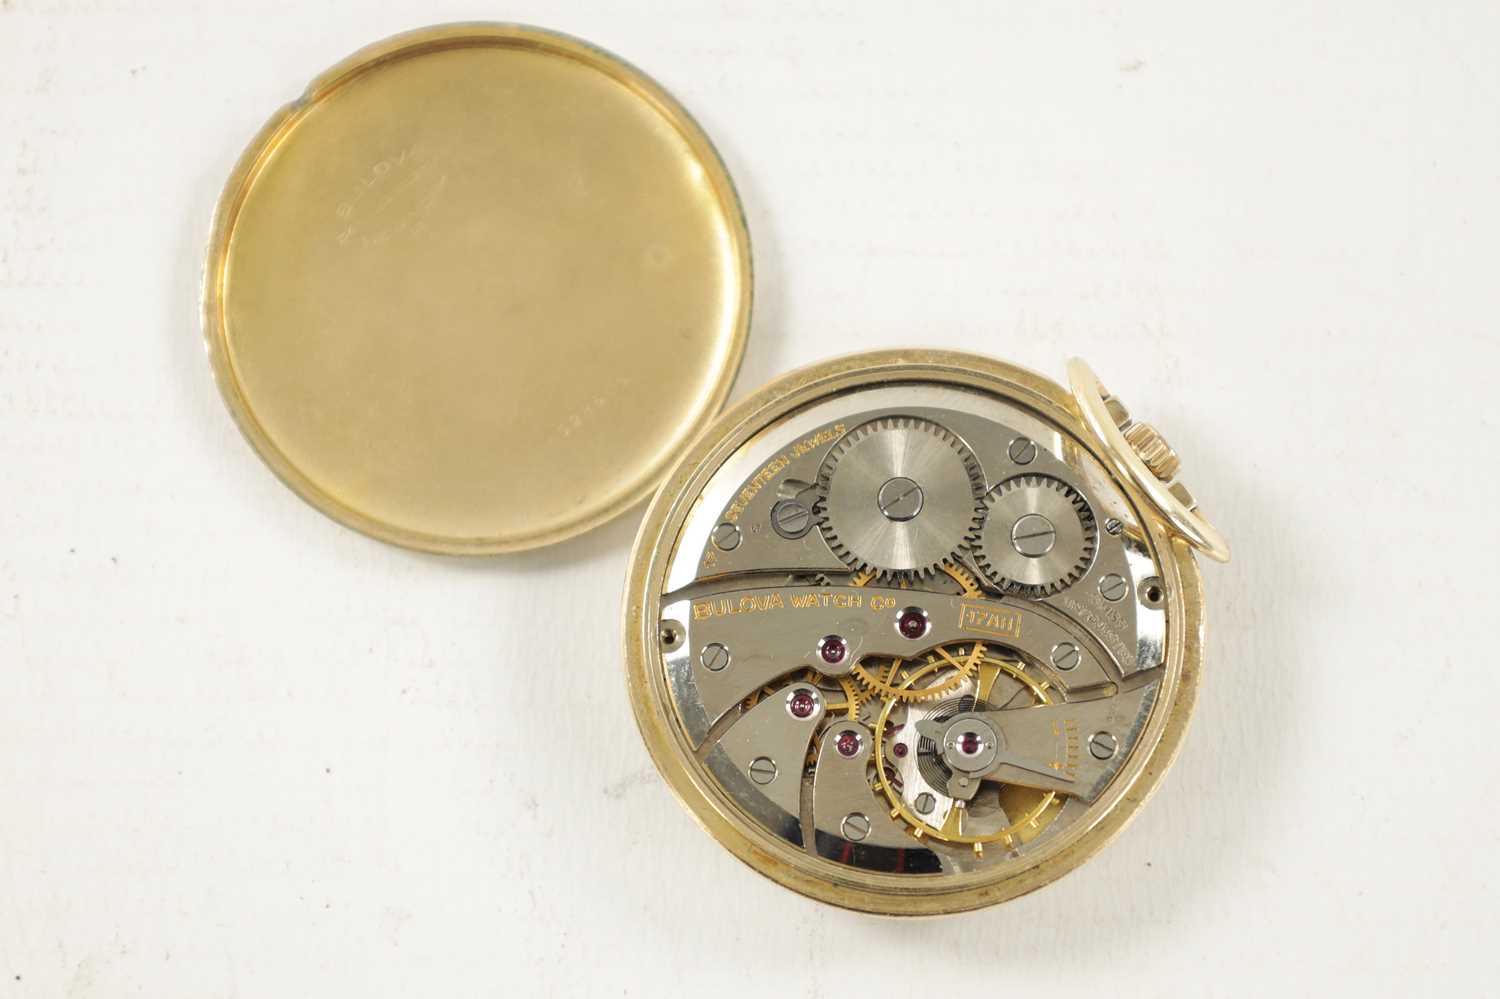 AN ART DECO 10CT ROLLED GOLD BULOVA POCKET WATCH - Image 2 of 4